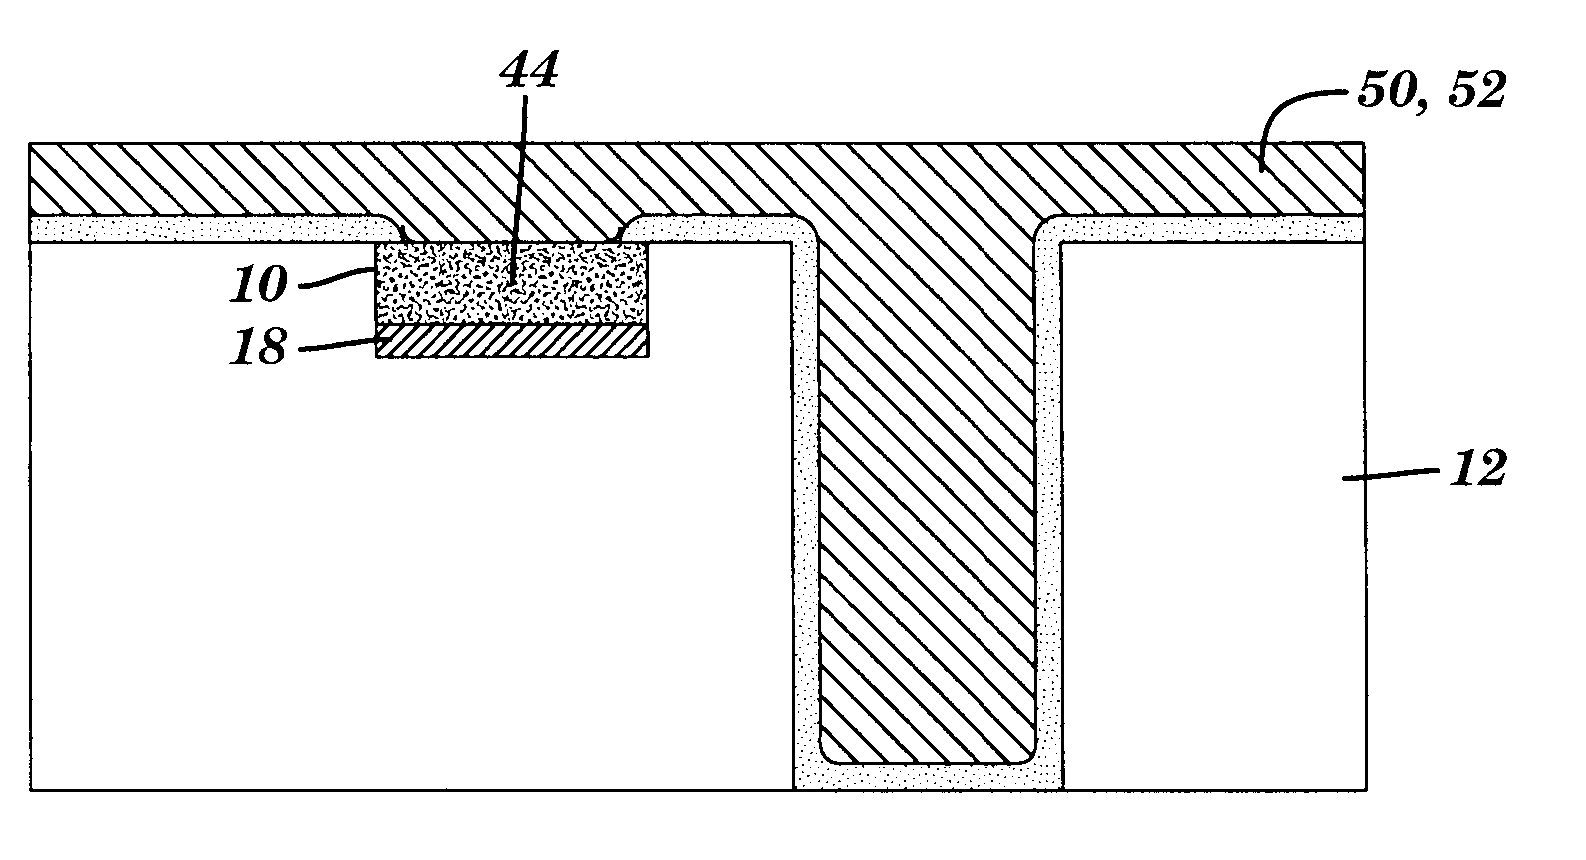 Silicide resistor in BEOL layer of semiconductor device and method